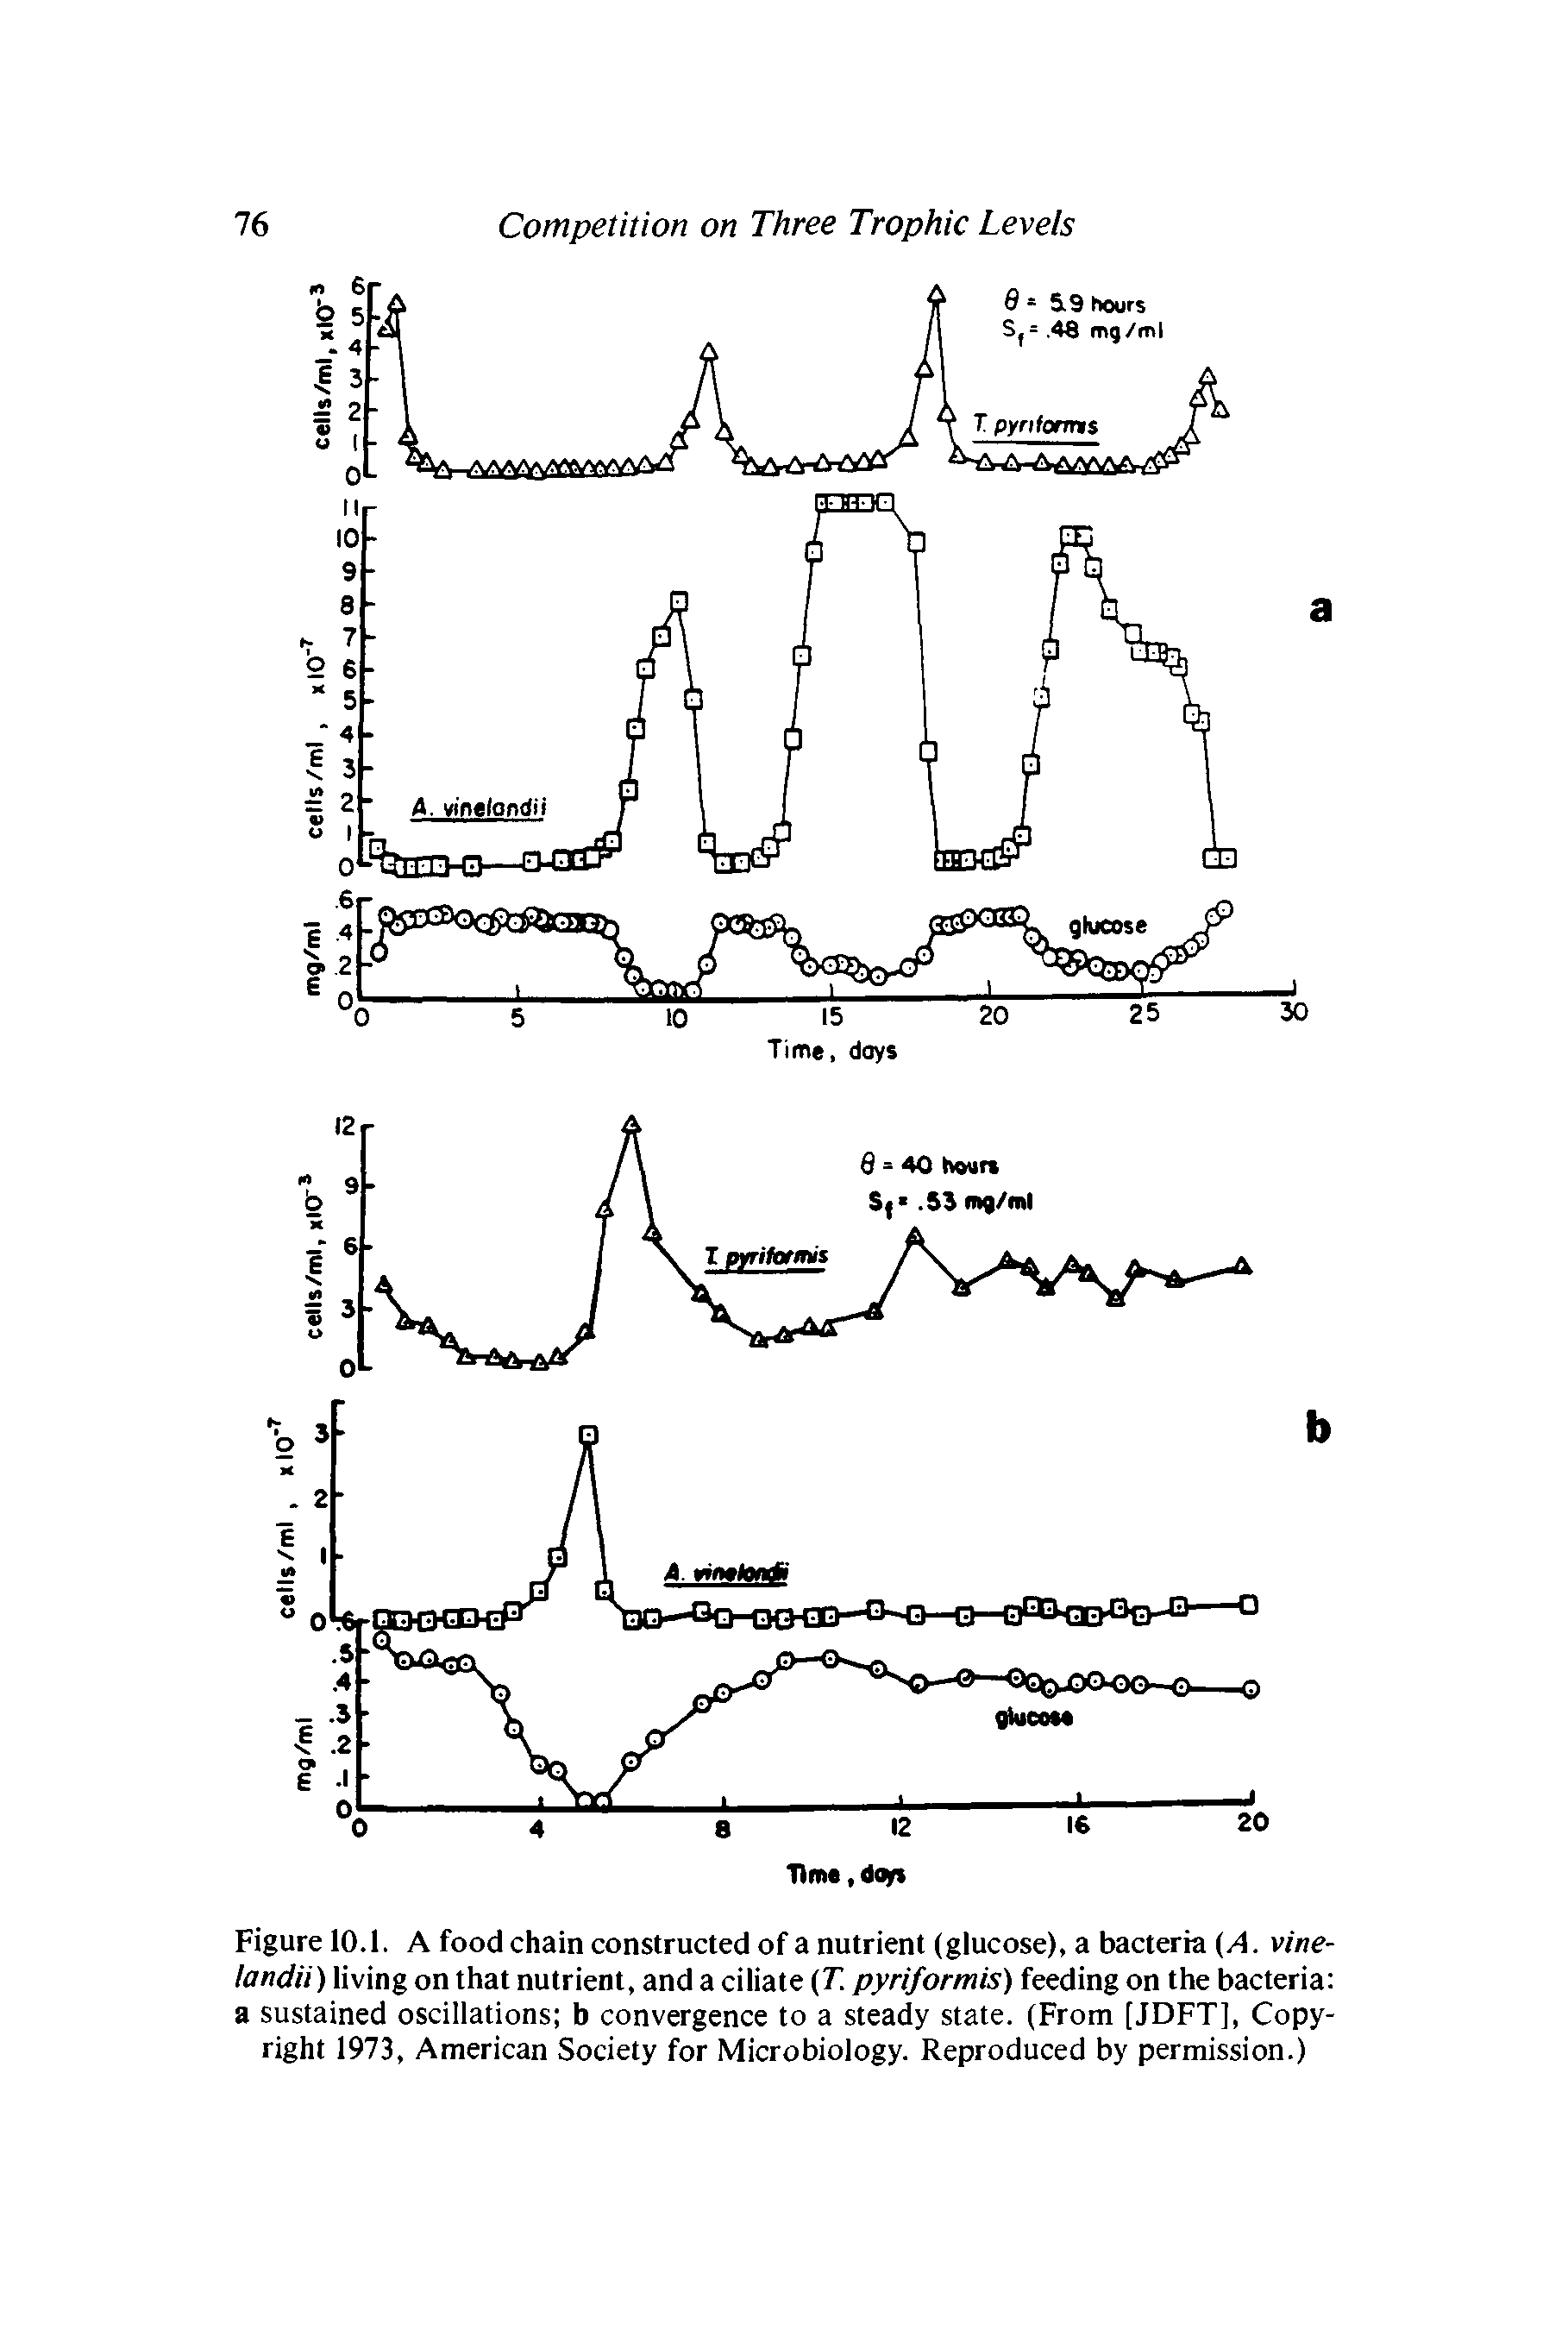 Figure 10.1. A food chain constructed of a nutrient (glucose), a bacteria A. vine-tandii) living on that nutrient, and a ciliate (T. pyriformis) feeding on the bacteria a sustained oscillations b convergence to a steady state. (From [JDFT], Copyright 1973, American Society for Microbiology. Reproduced by permission.)...